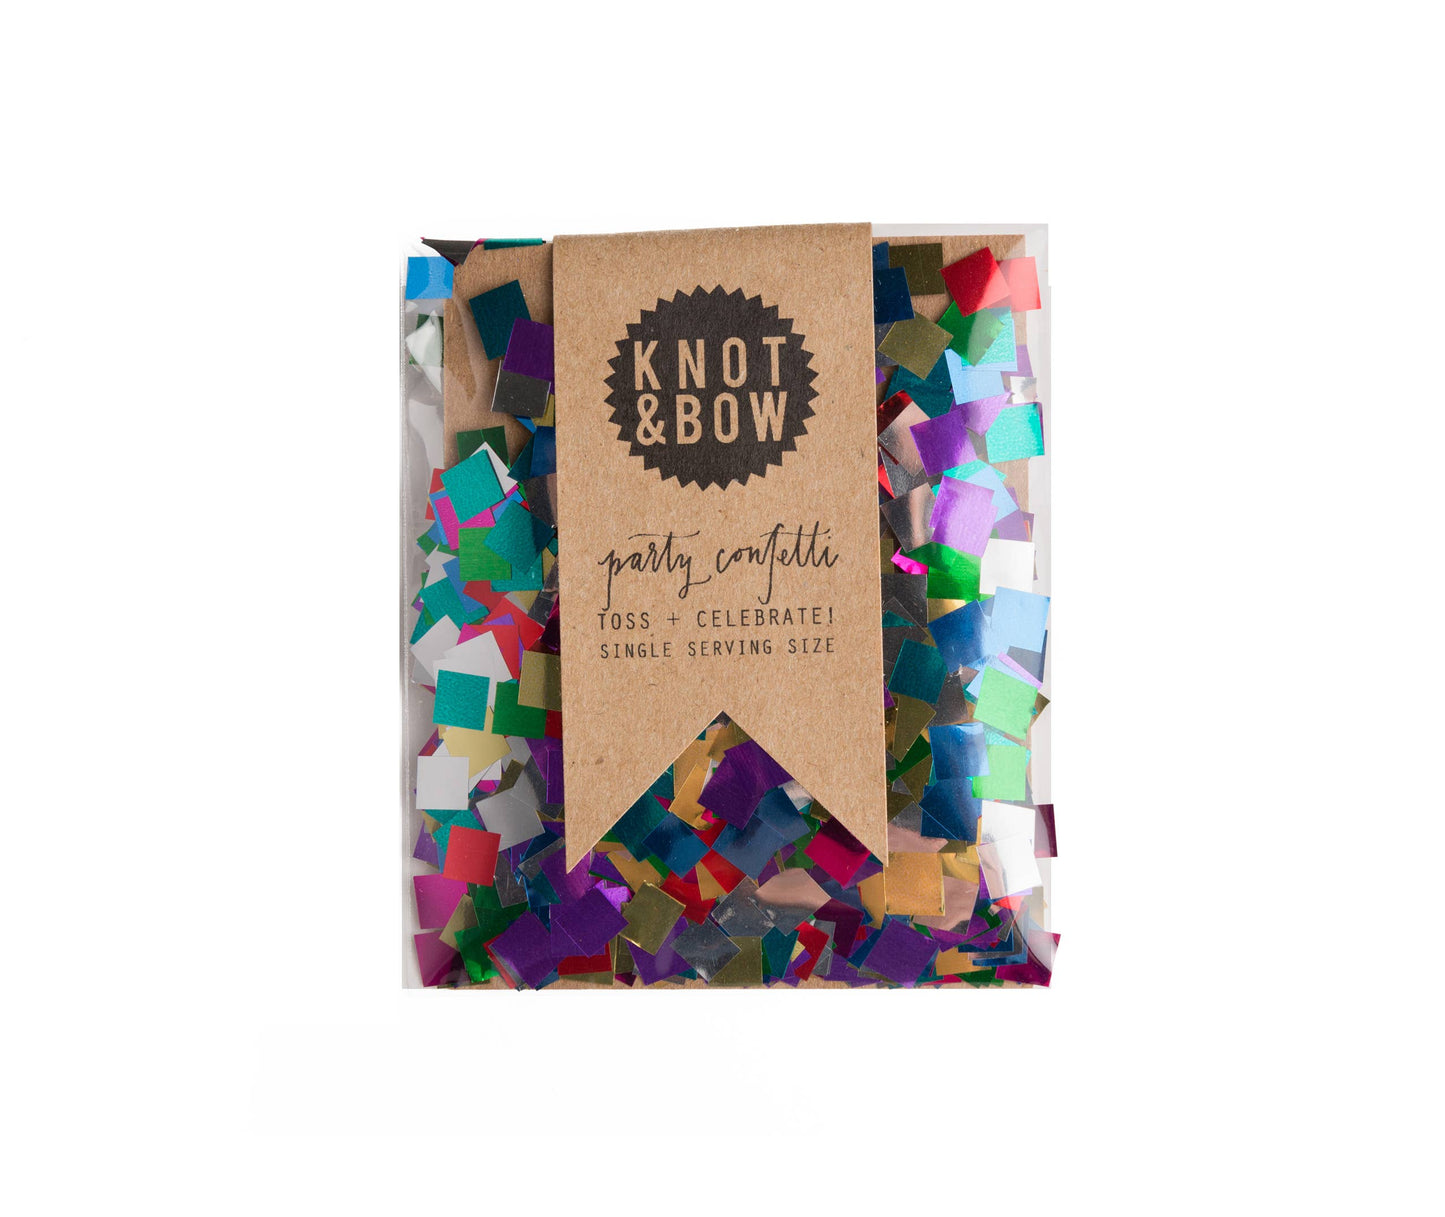 Metallic Rainbow Single Serving Size™ Confetti by Knot & Bow